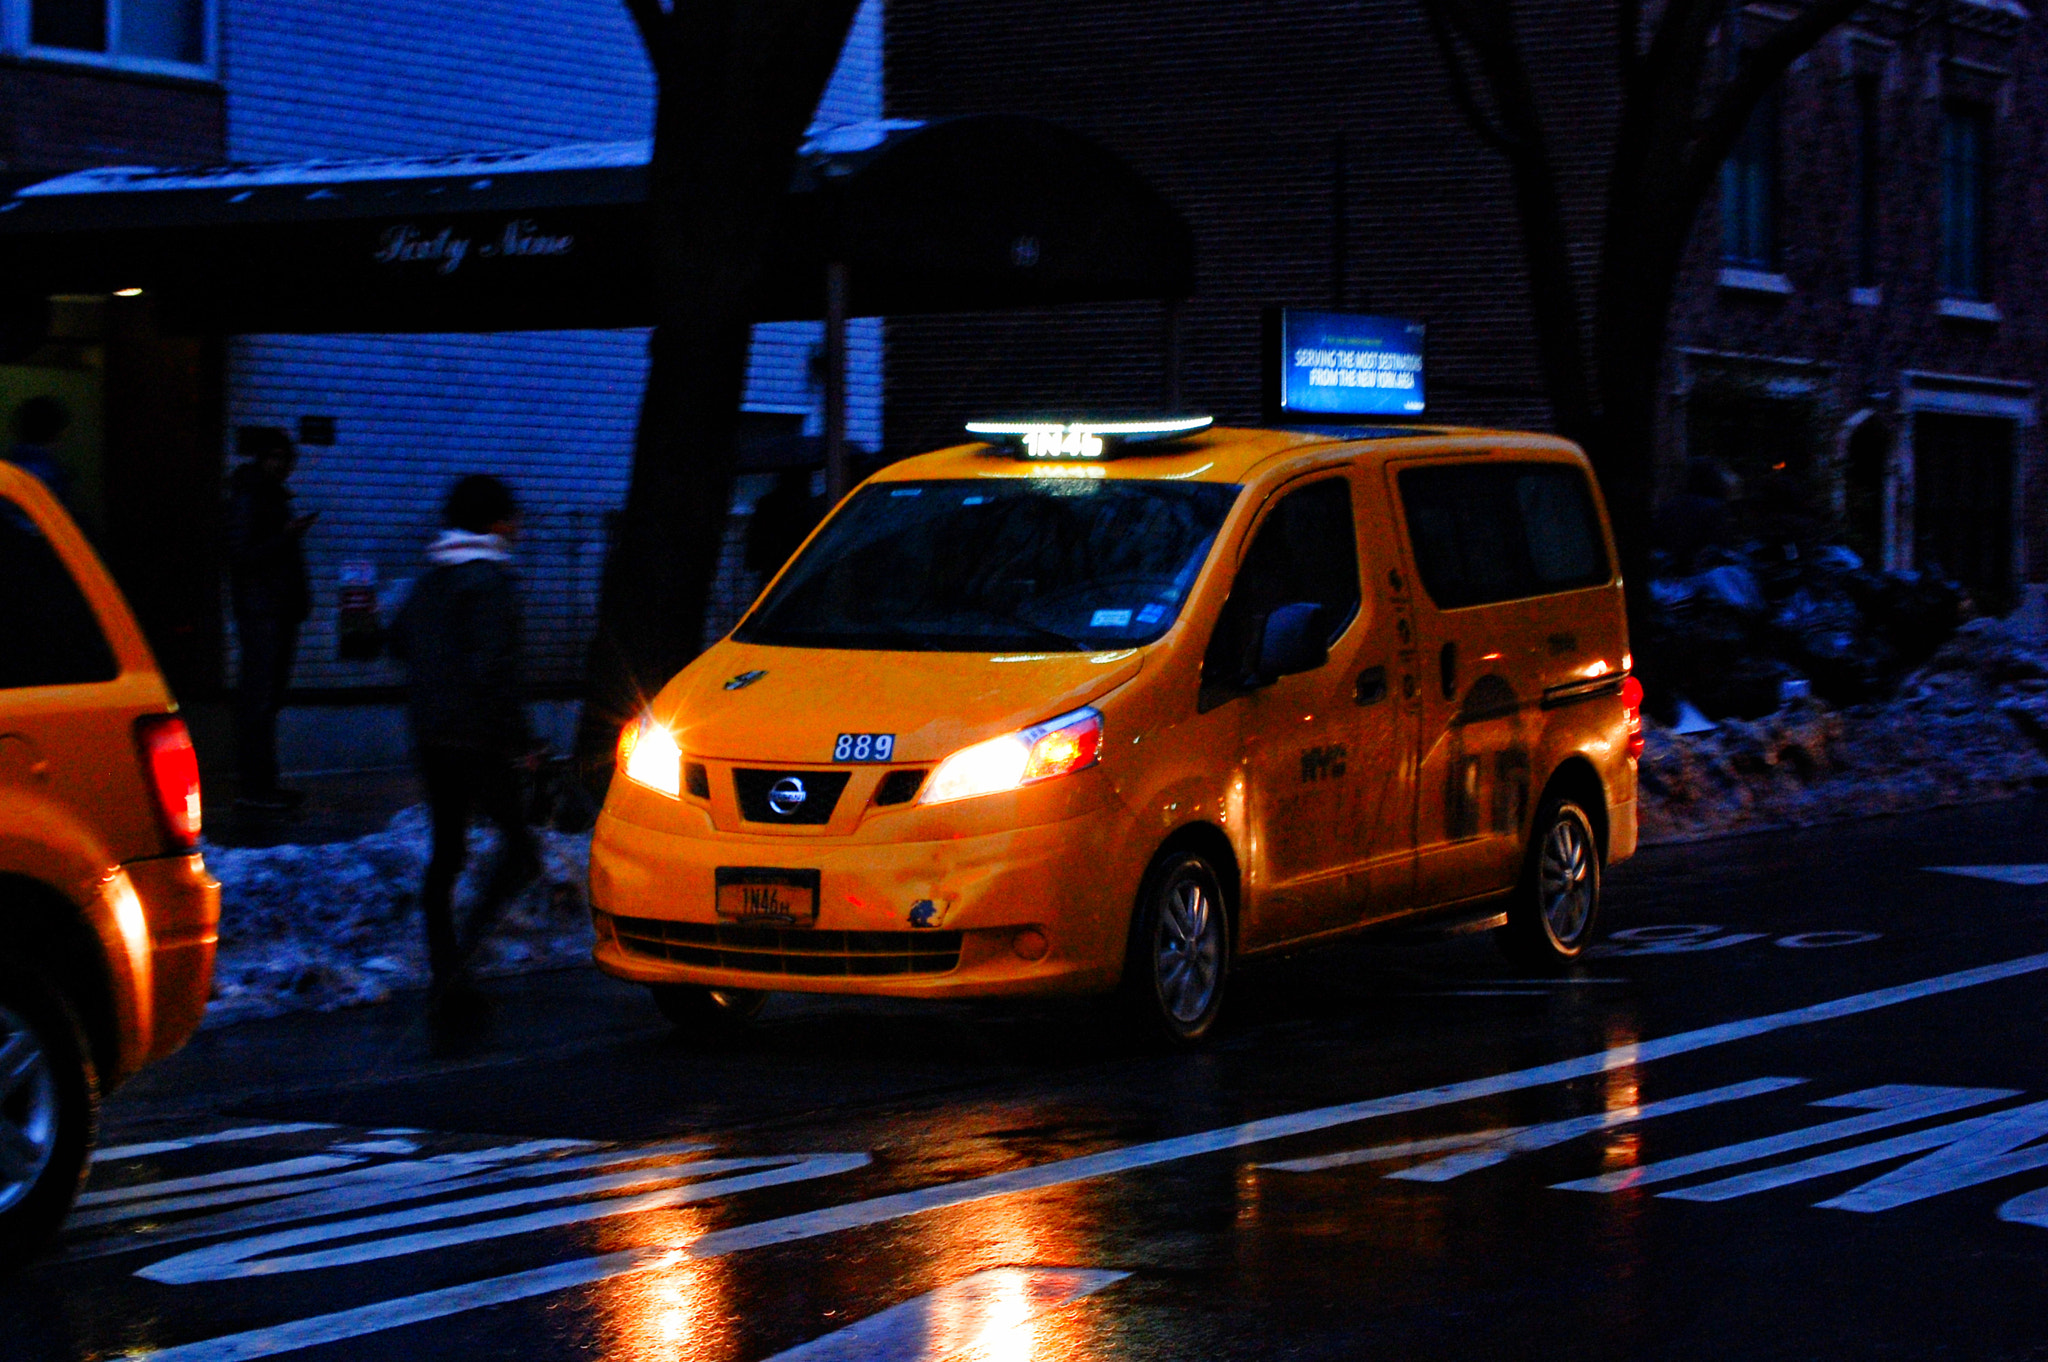 Nikon D40 sample photo. Dramtic picture of a taxi photography